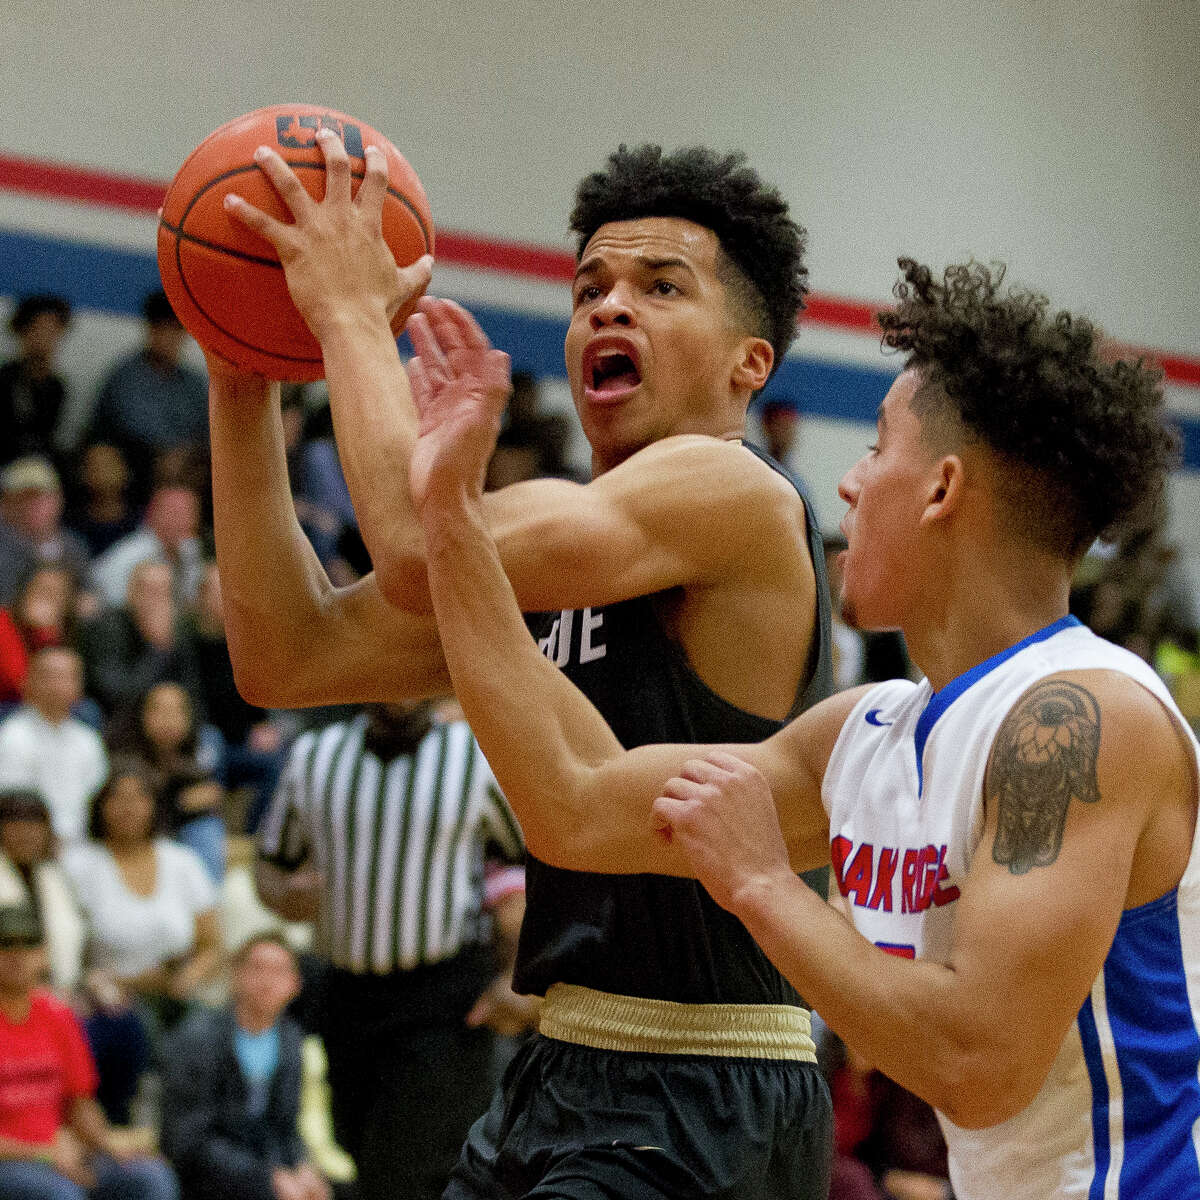 Conroe guard Antonio Evans (5) goes up for a shot against Oak Ridge guard Cristian Calix (2) during the third quarter of a District 12-6A high school boys basketball game at Oak Ridge High School, Friday, Jan. 12, 2018.